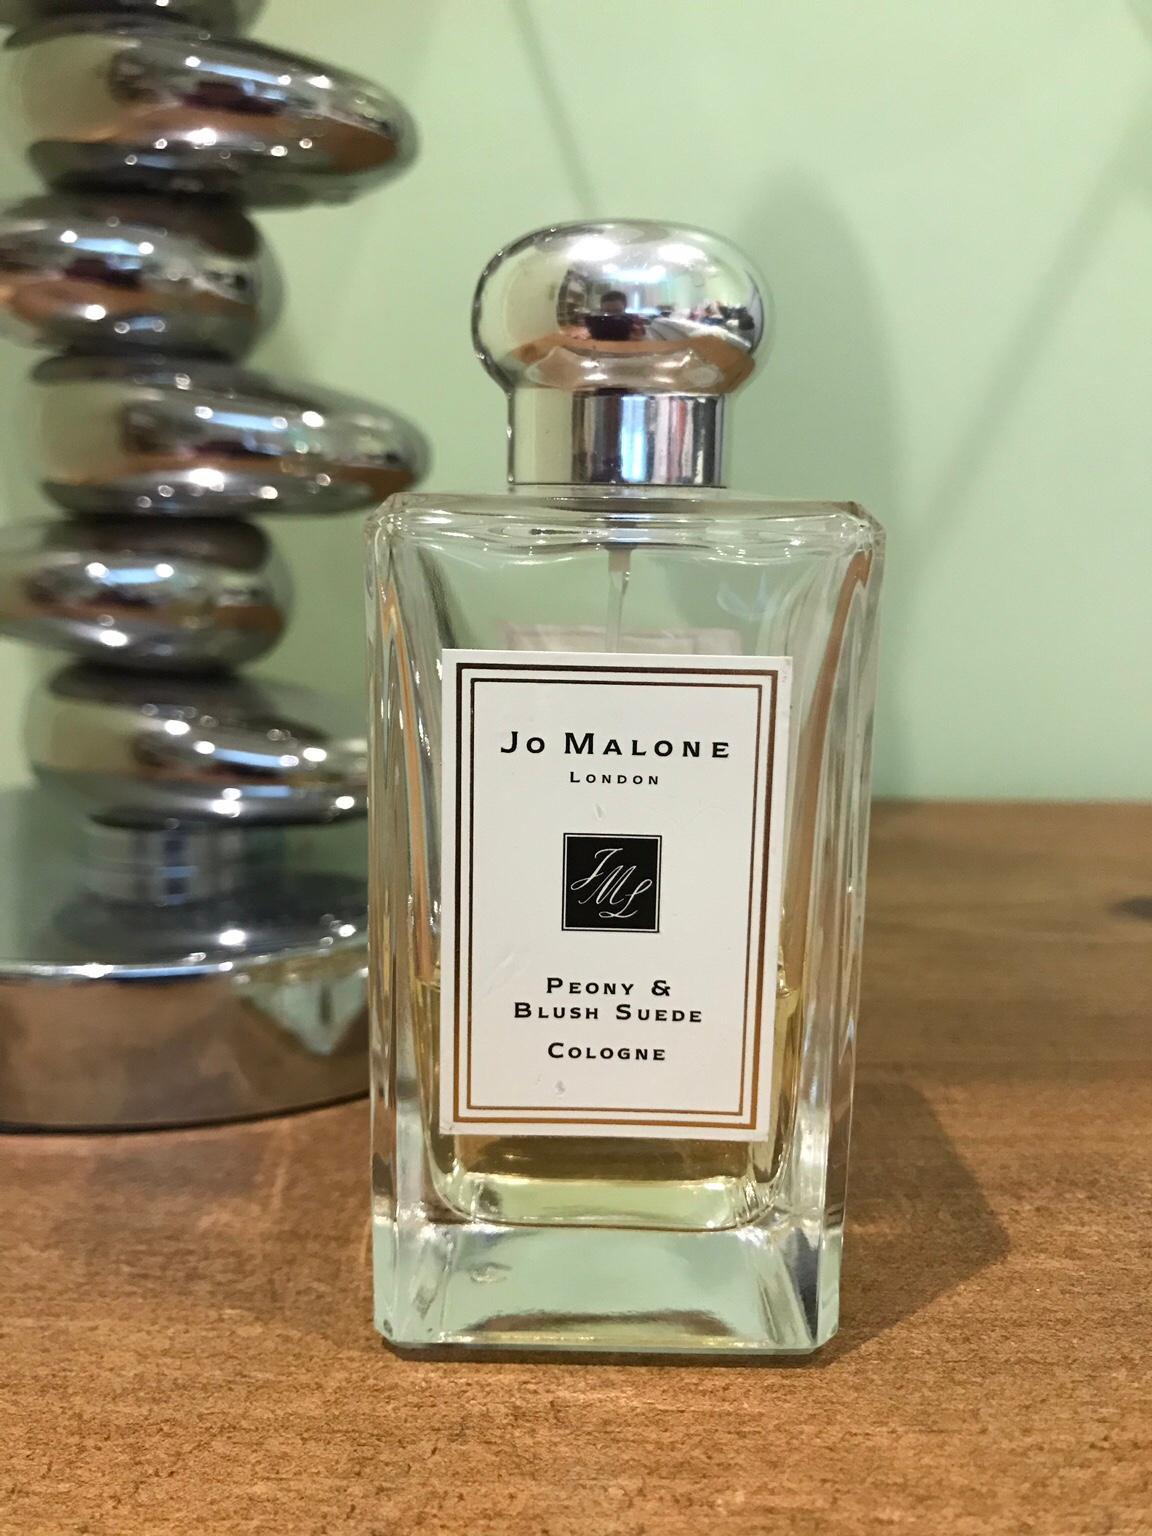 Jo Malone Peony & Blush Suede Cologne in South Derbyshire for £26.00